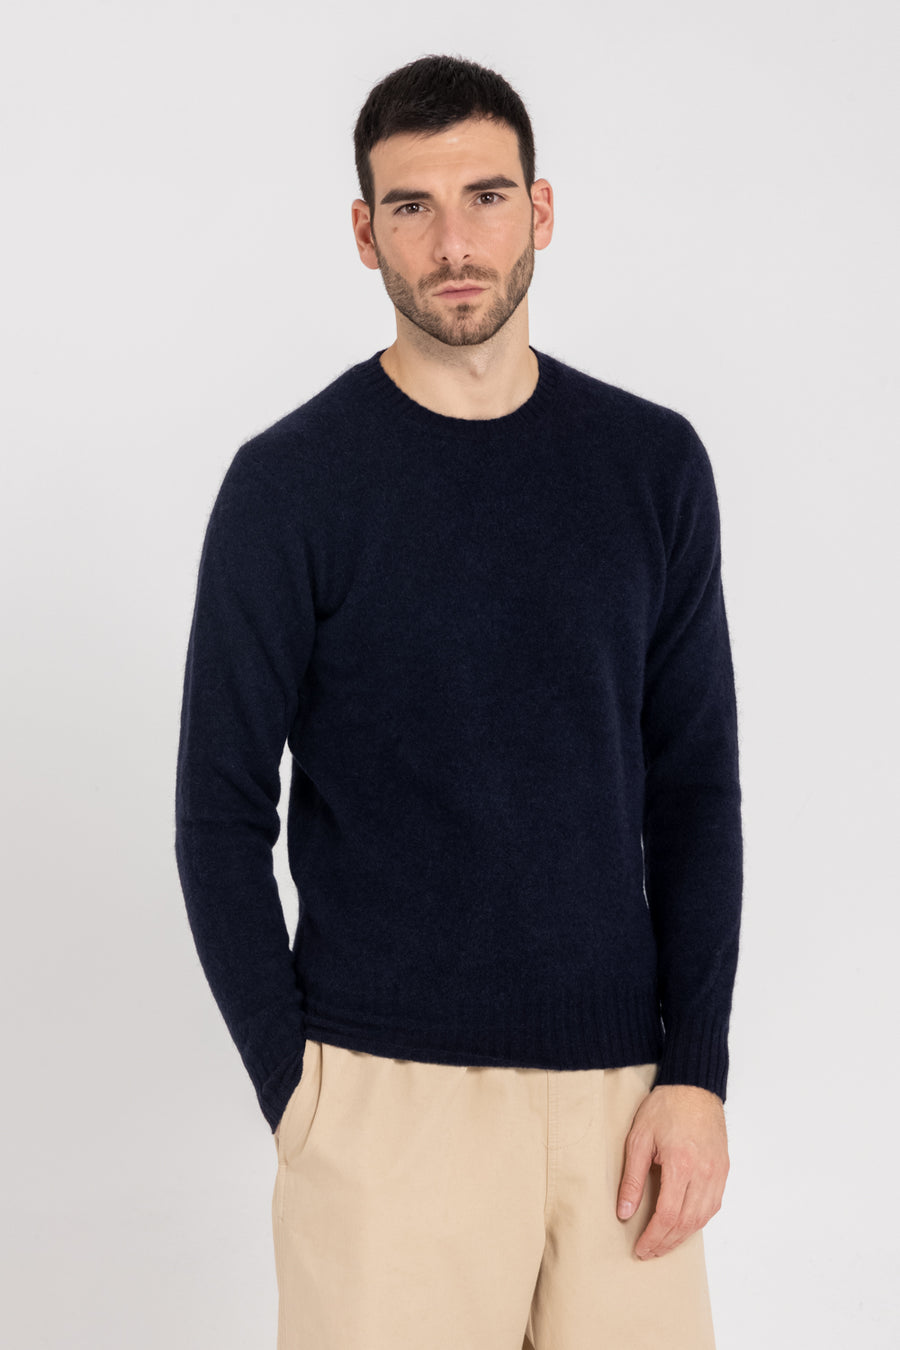 SOFT TOUCH CREWNECK SWEATER